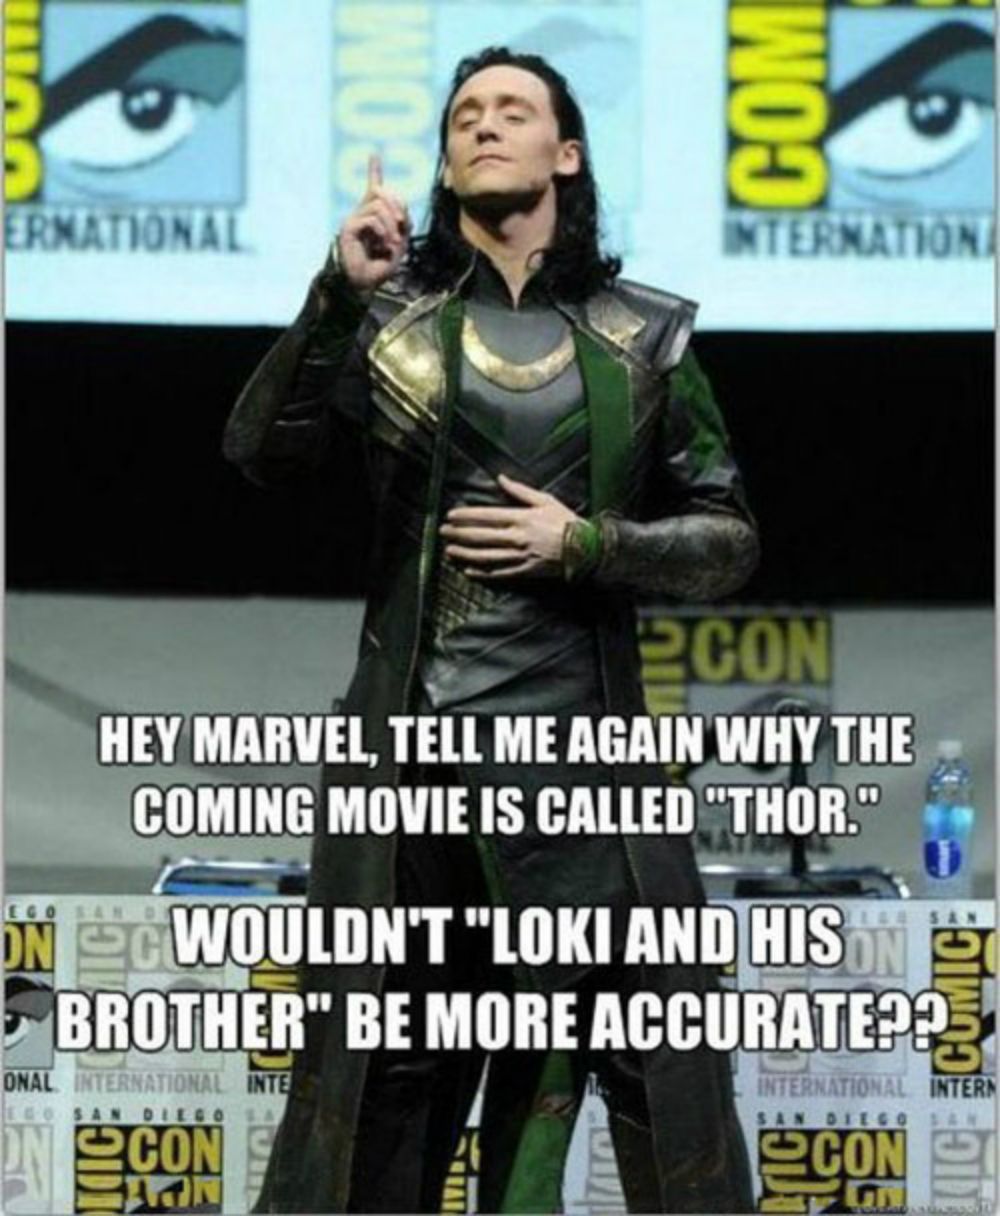 loki-and-his-brother